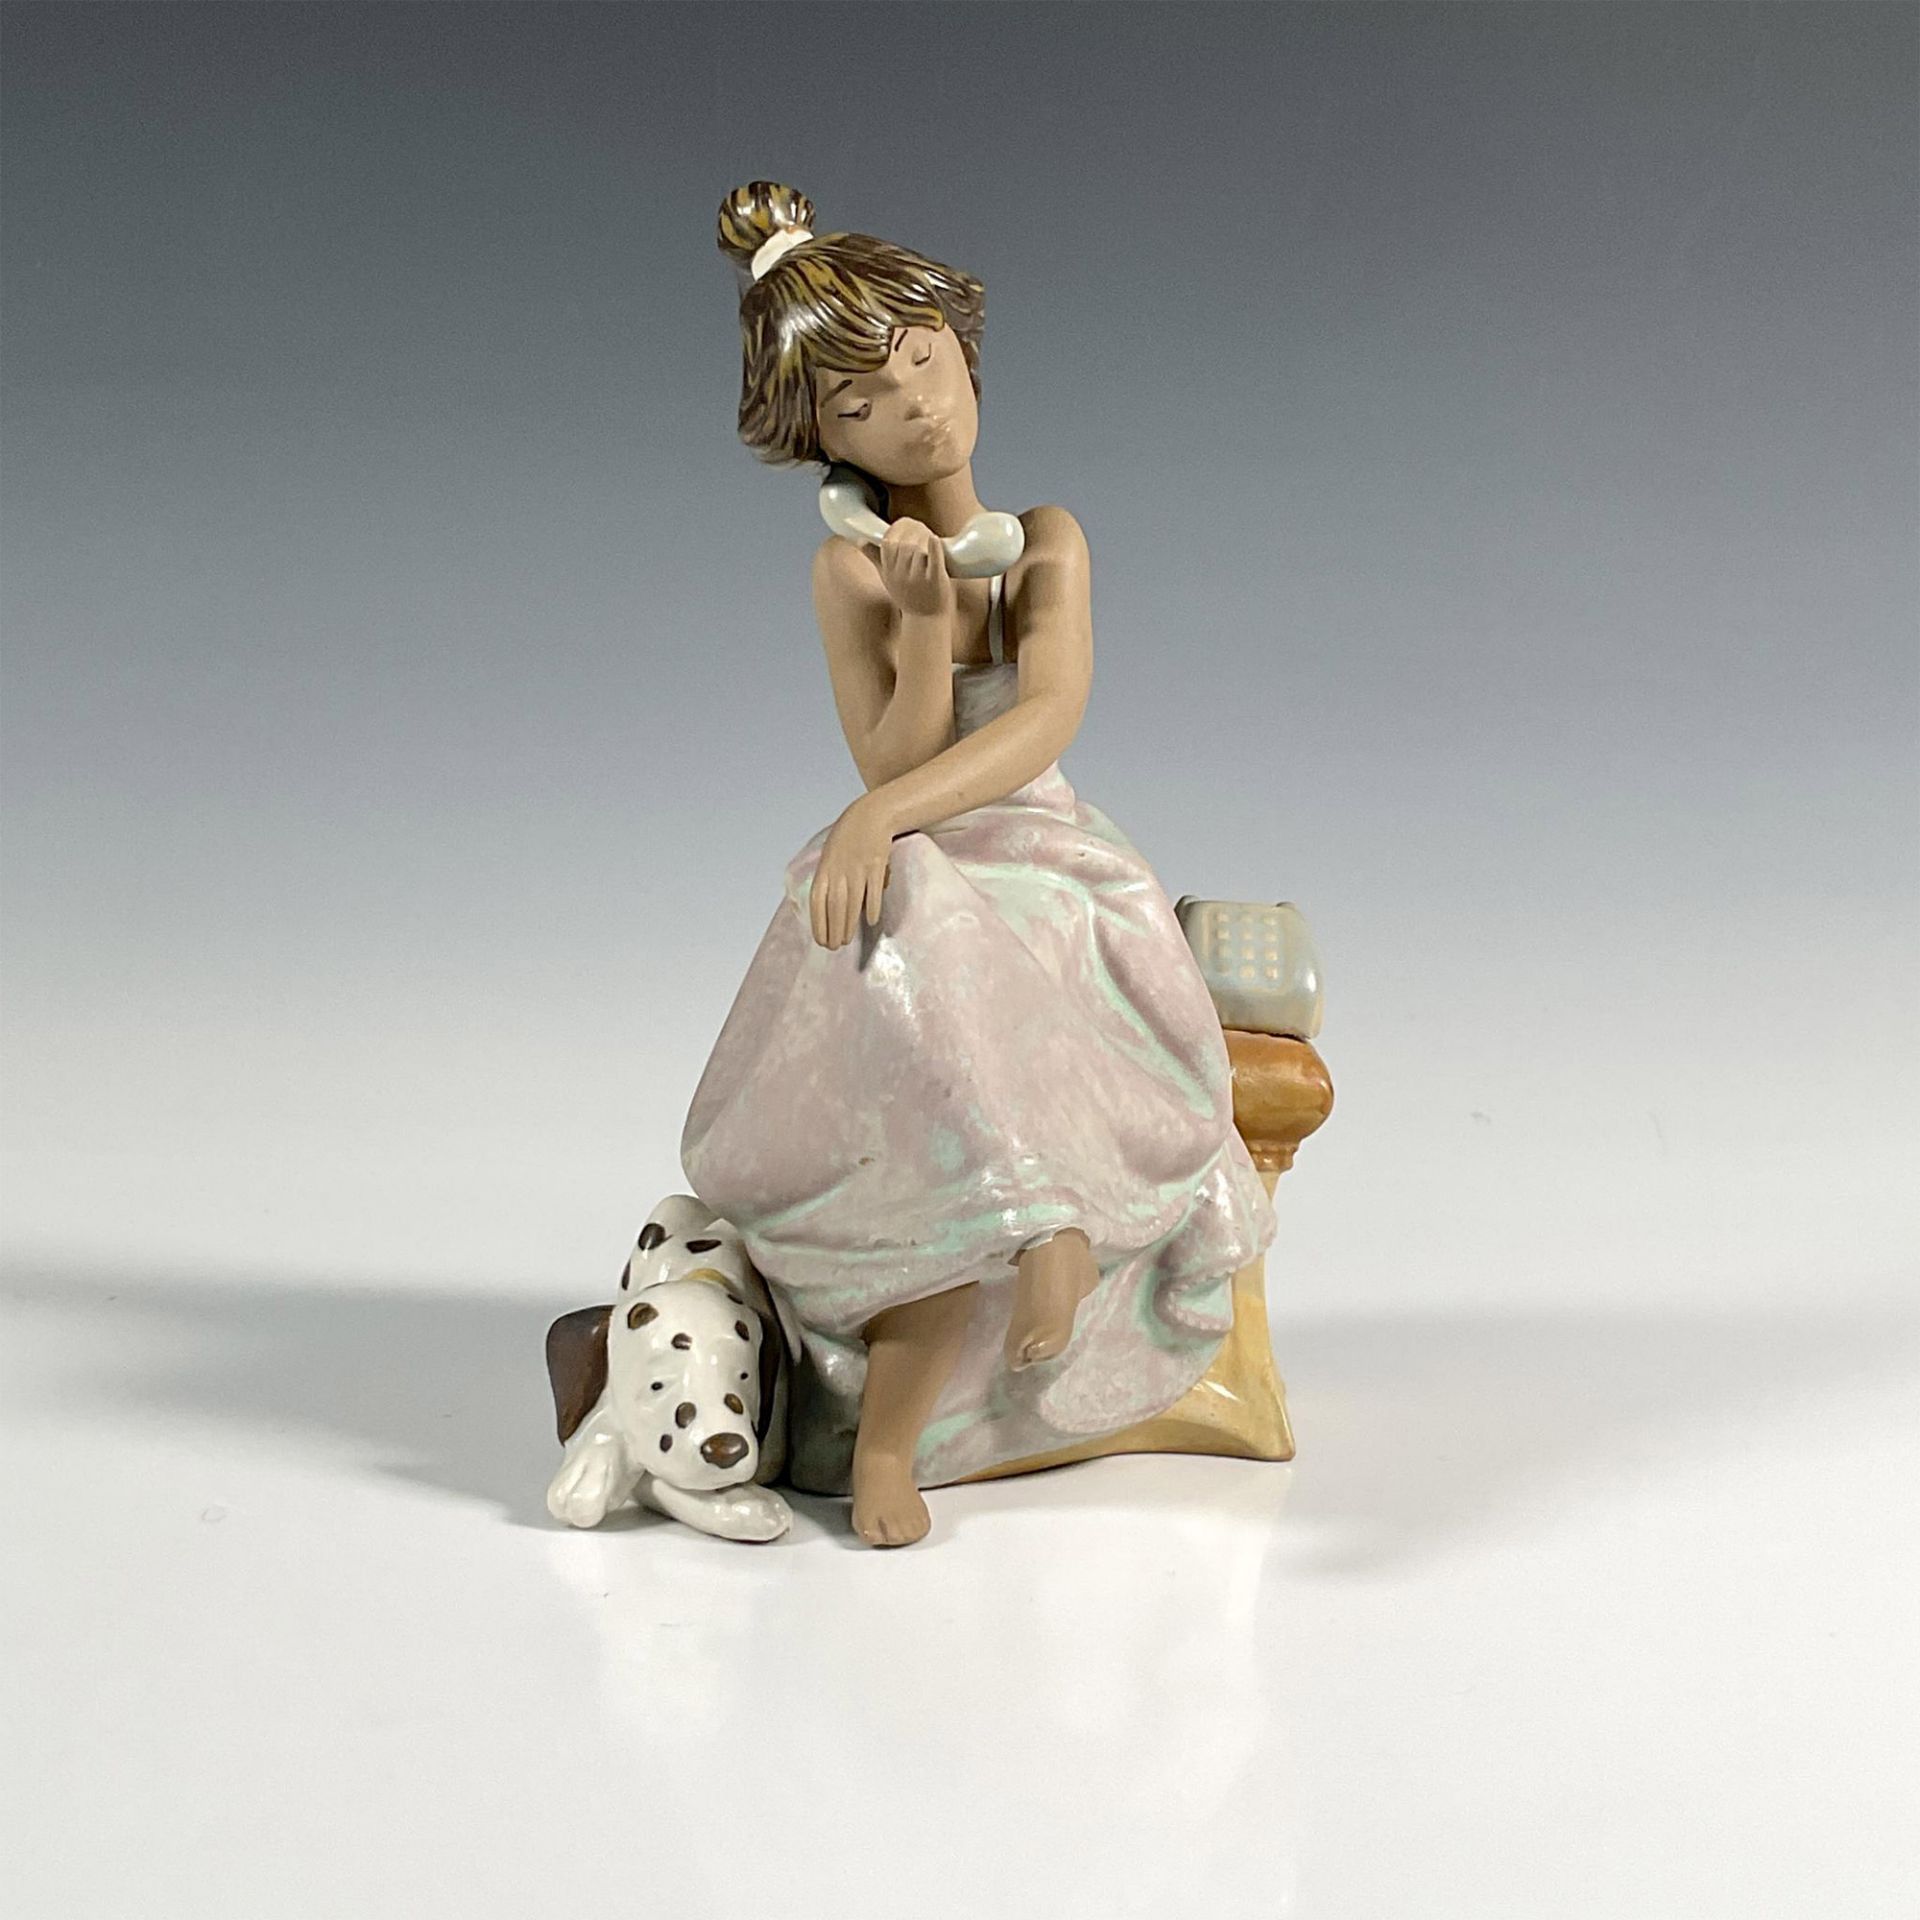 Chit Chat 1015466 - Lladro Porcelain Figurine - Image 6 of 8